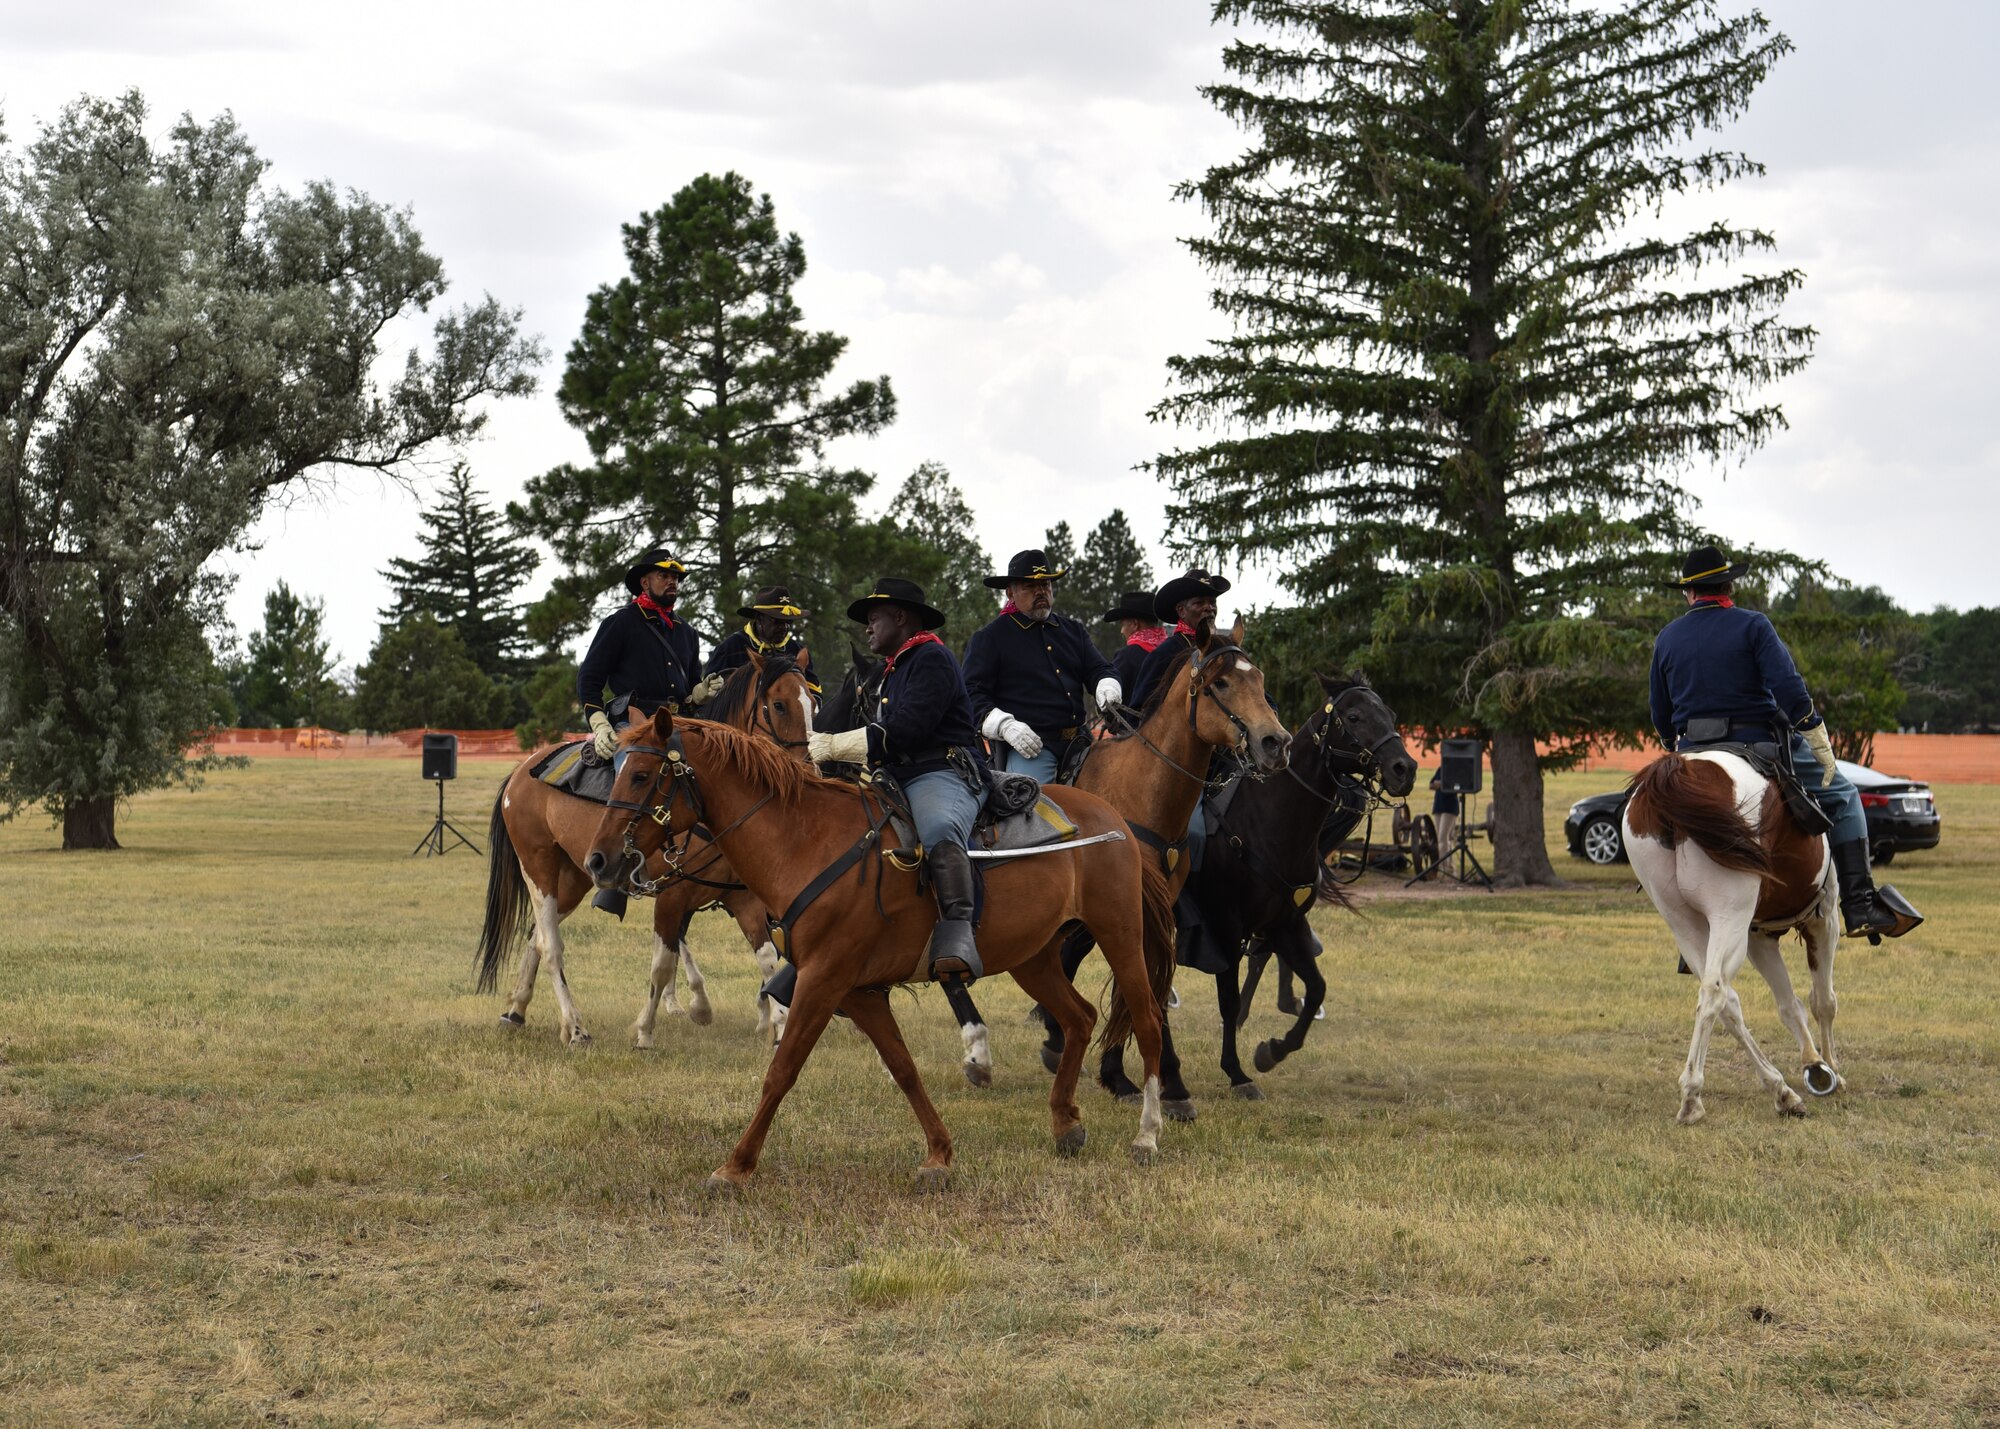 Members of a Buffalo soldier’s re-enactment riding team perform during Fort D.A. Russell Days on F.E. Warren Air Force Base, Wyo., July 21, 2018. The performance is a demonstration of historical cavalry precision riding drills. The annual open house invites the community and visitors to tour the base to learn about its history and its current ICBM deterrence mission. (U.S. Air Force photo by Airman 1st Class Braydon Williams)